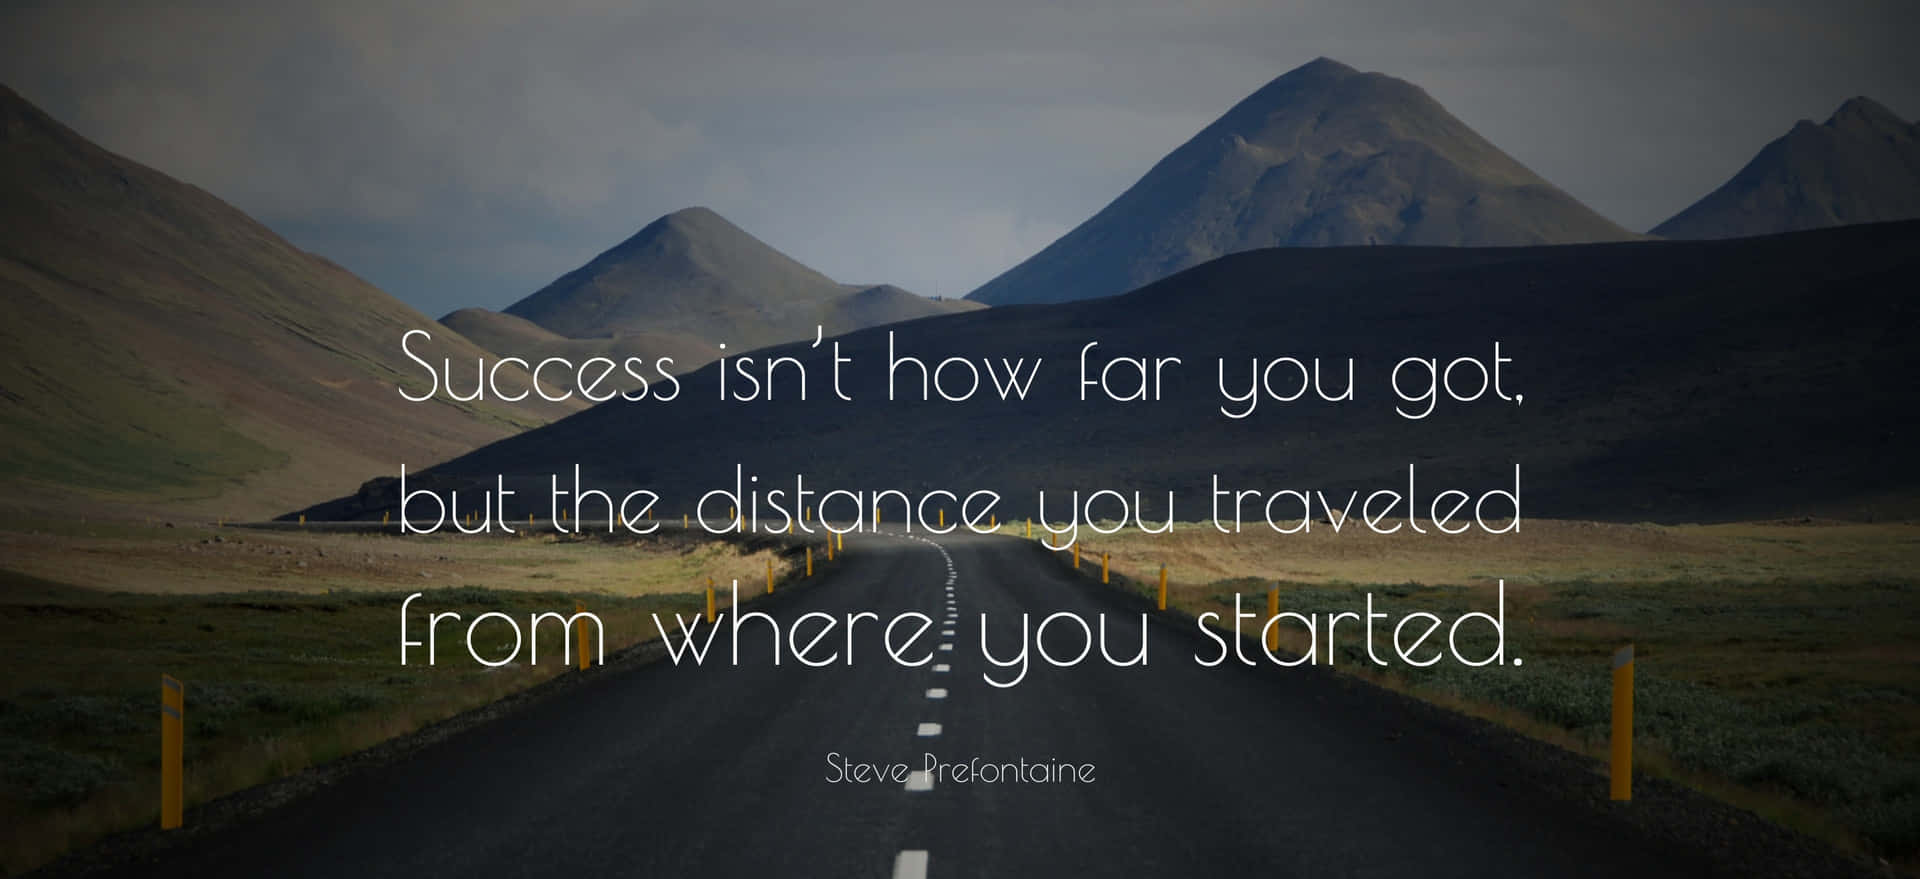 Success Isn't How You Got To The Distance You Traveled From Where You Started Background